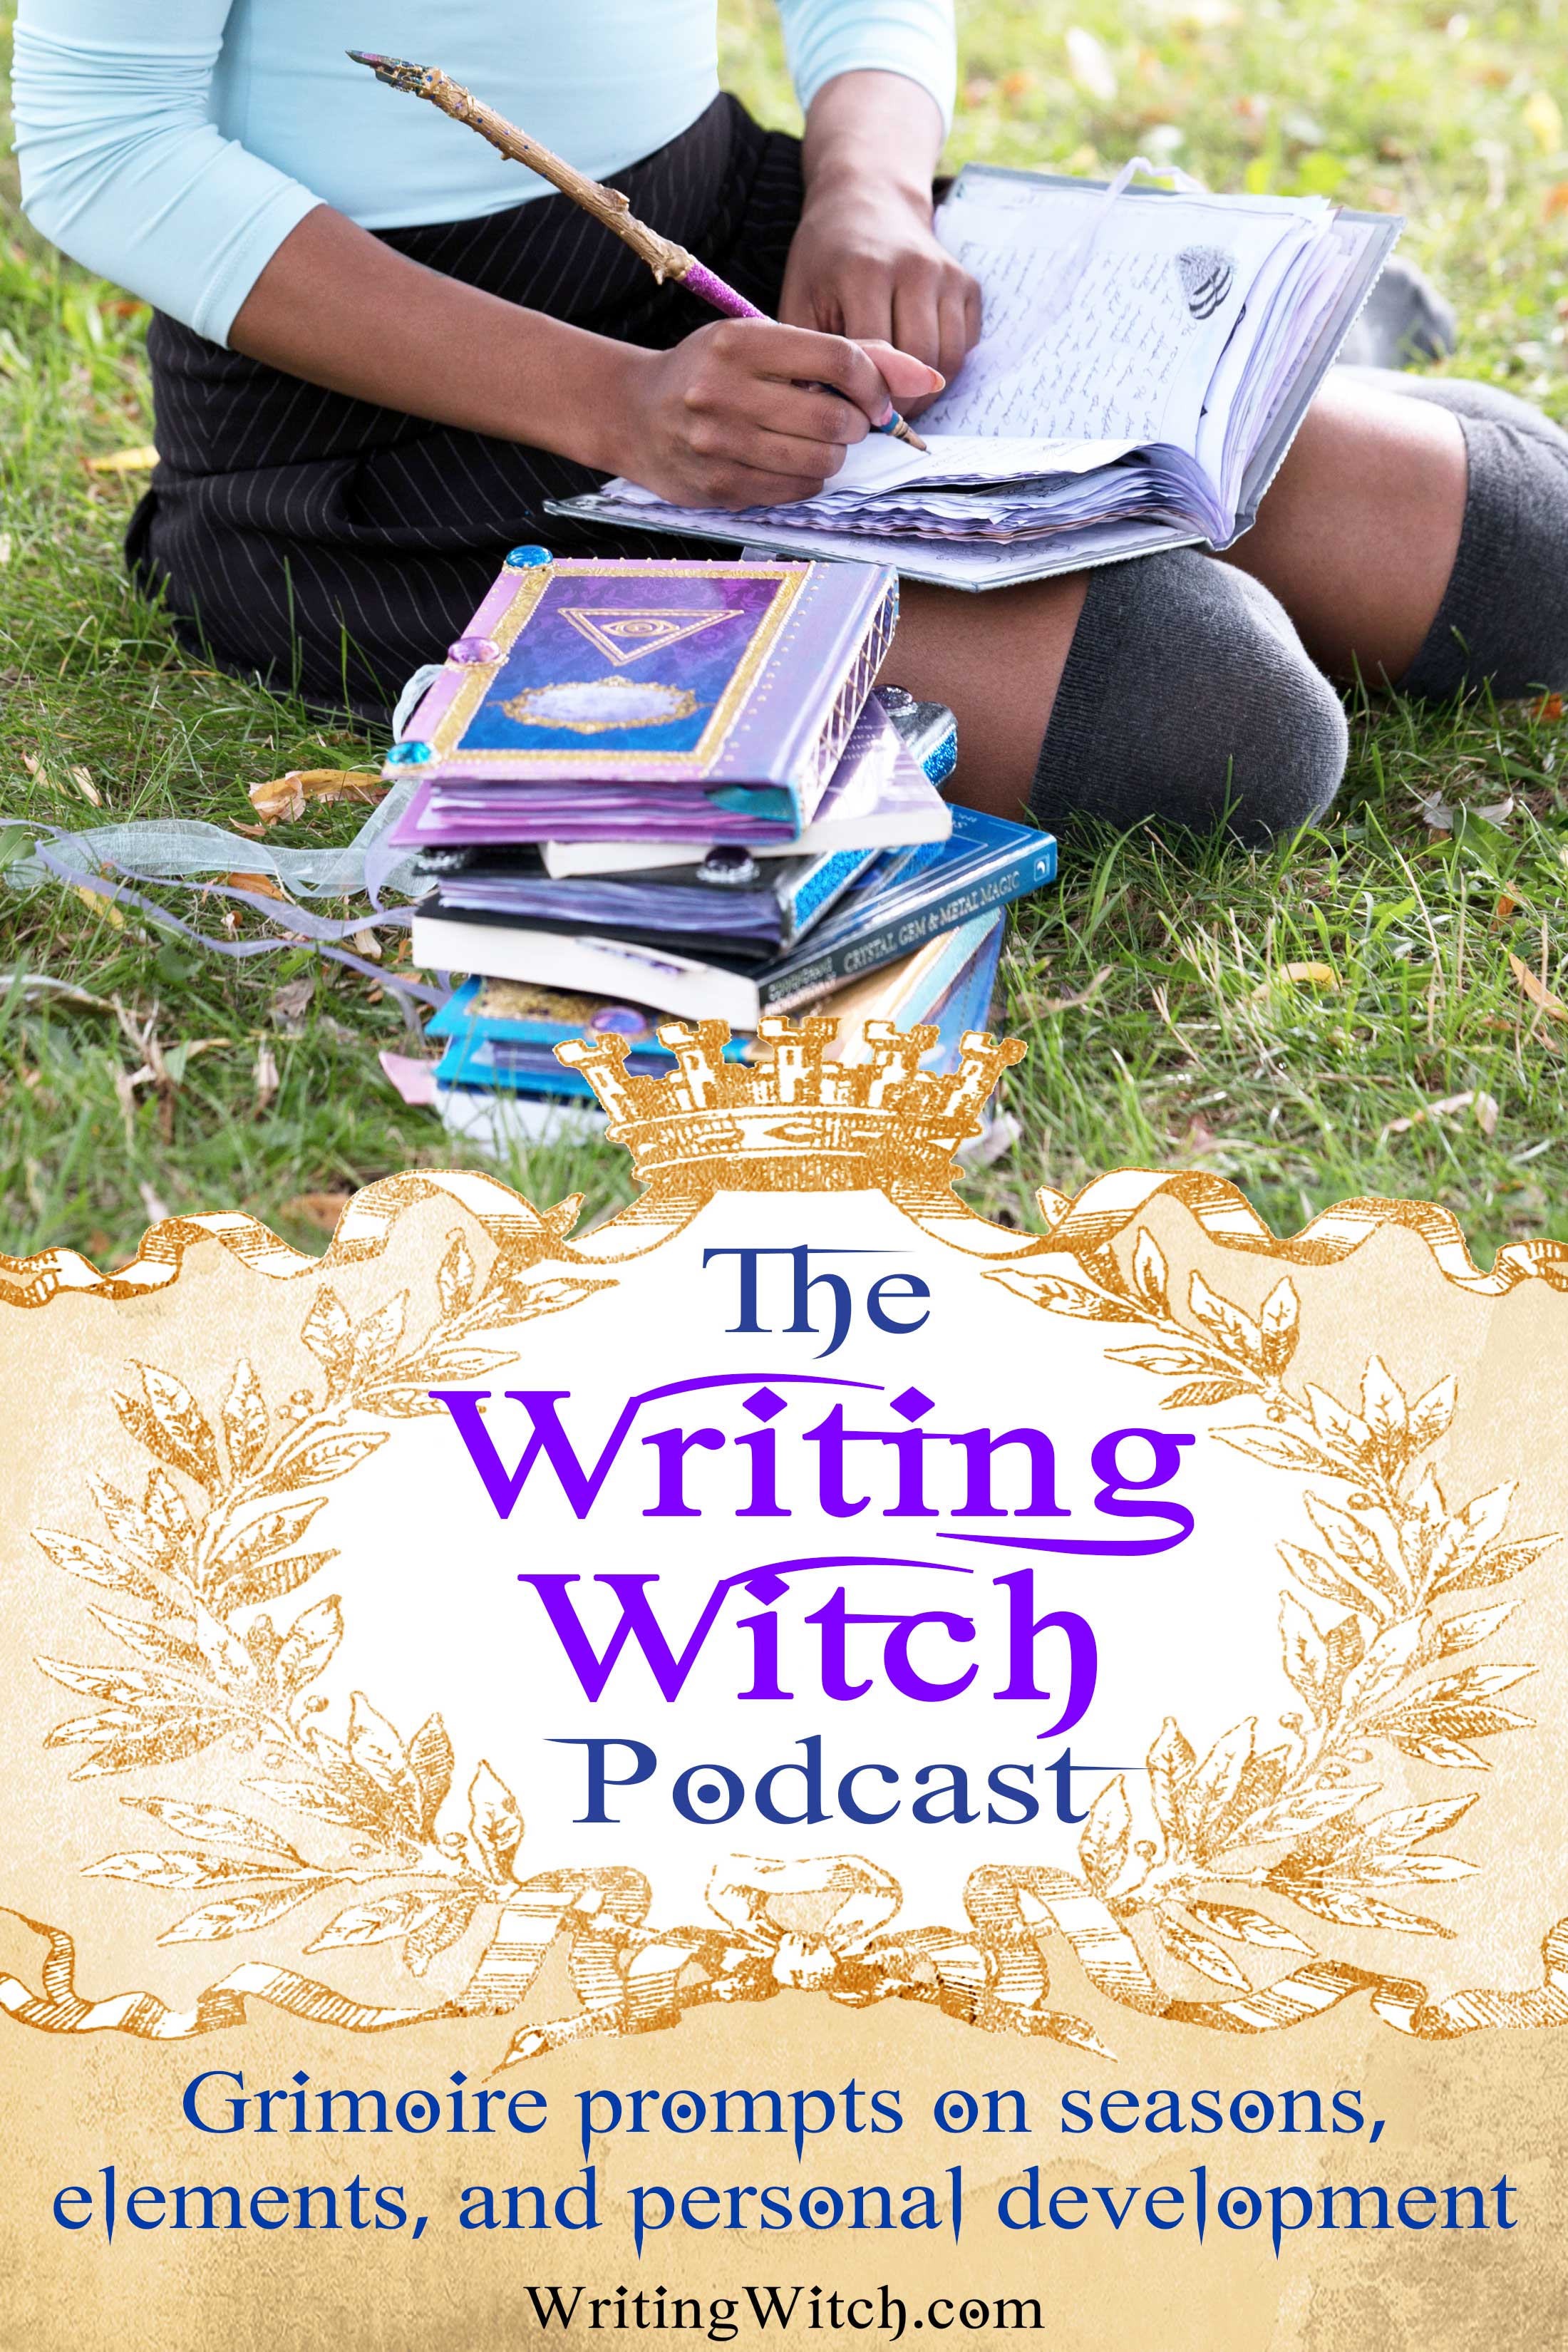 The Writing Witch Podcast